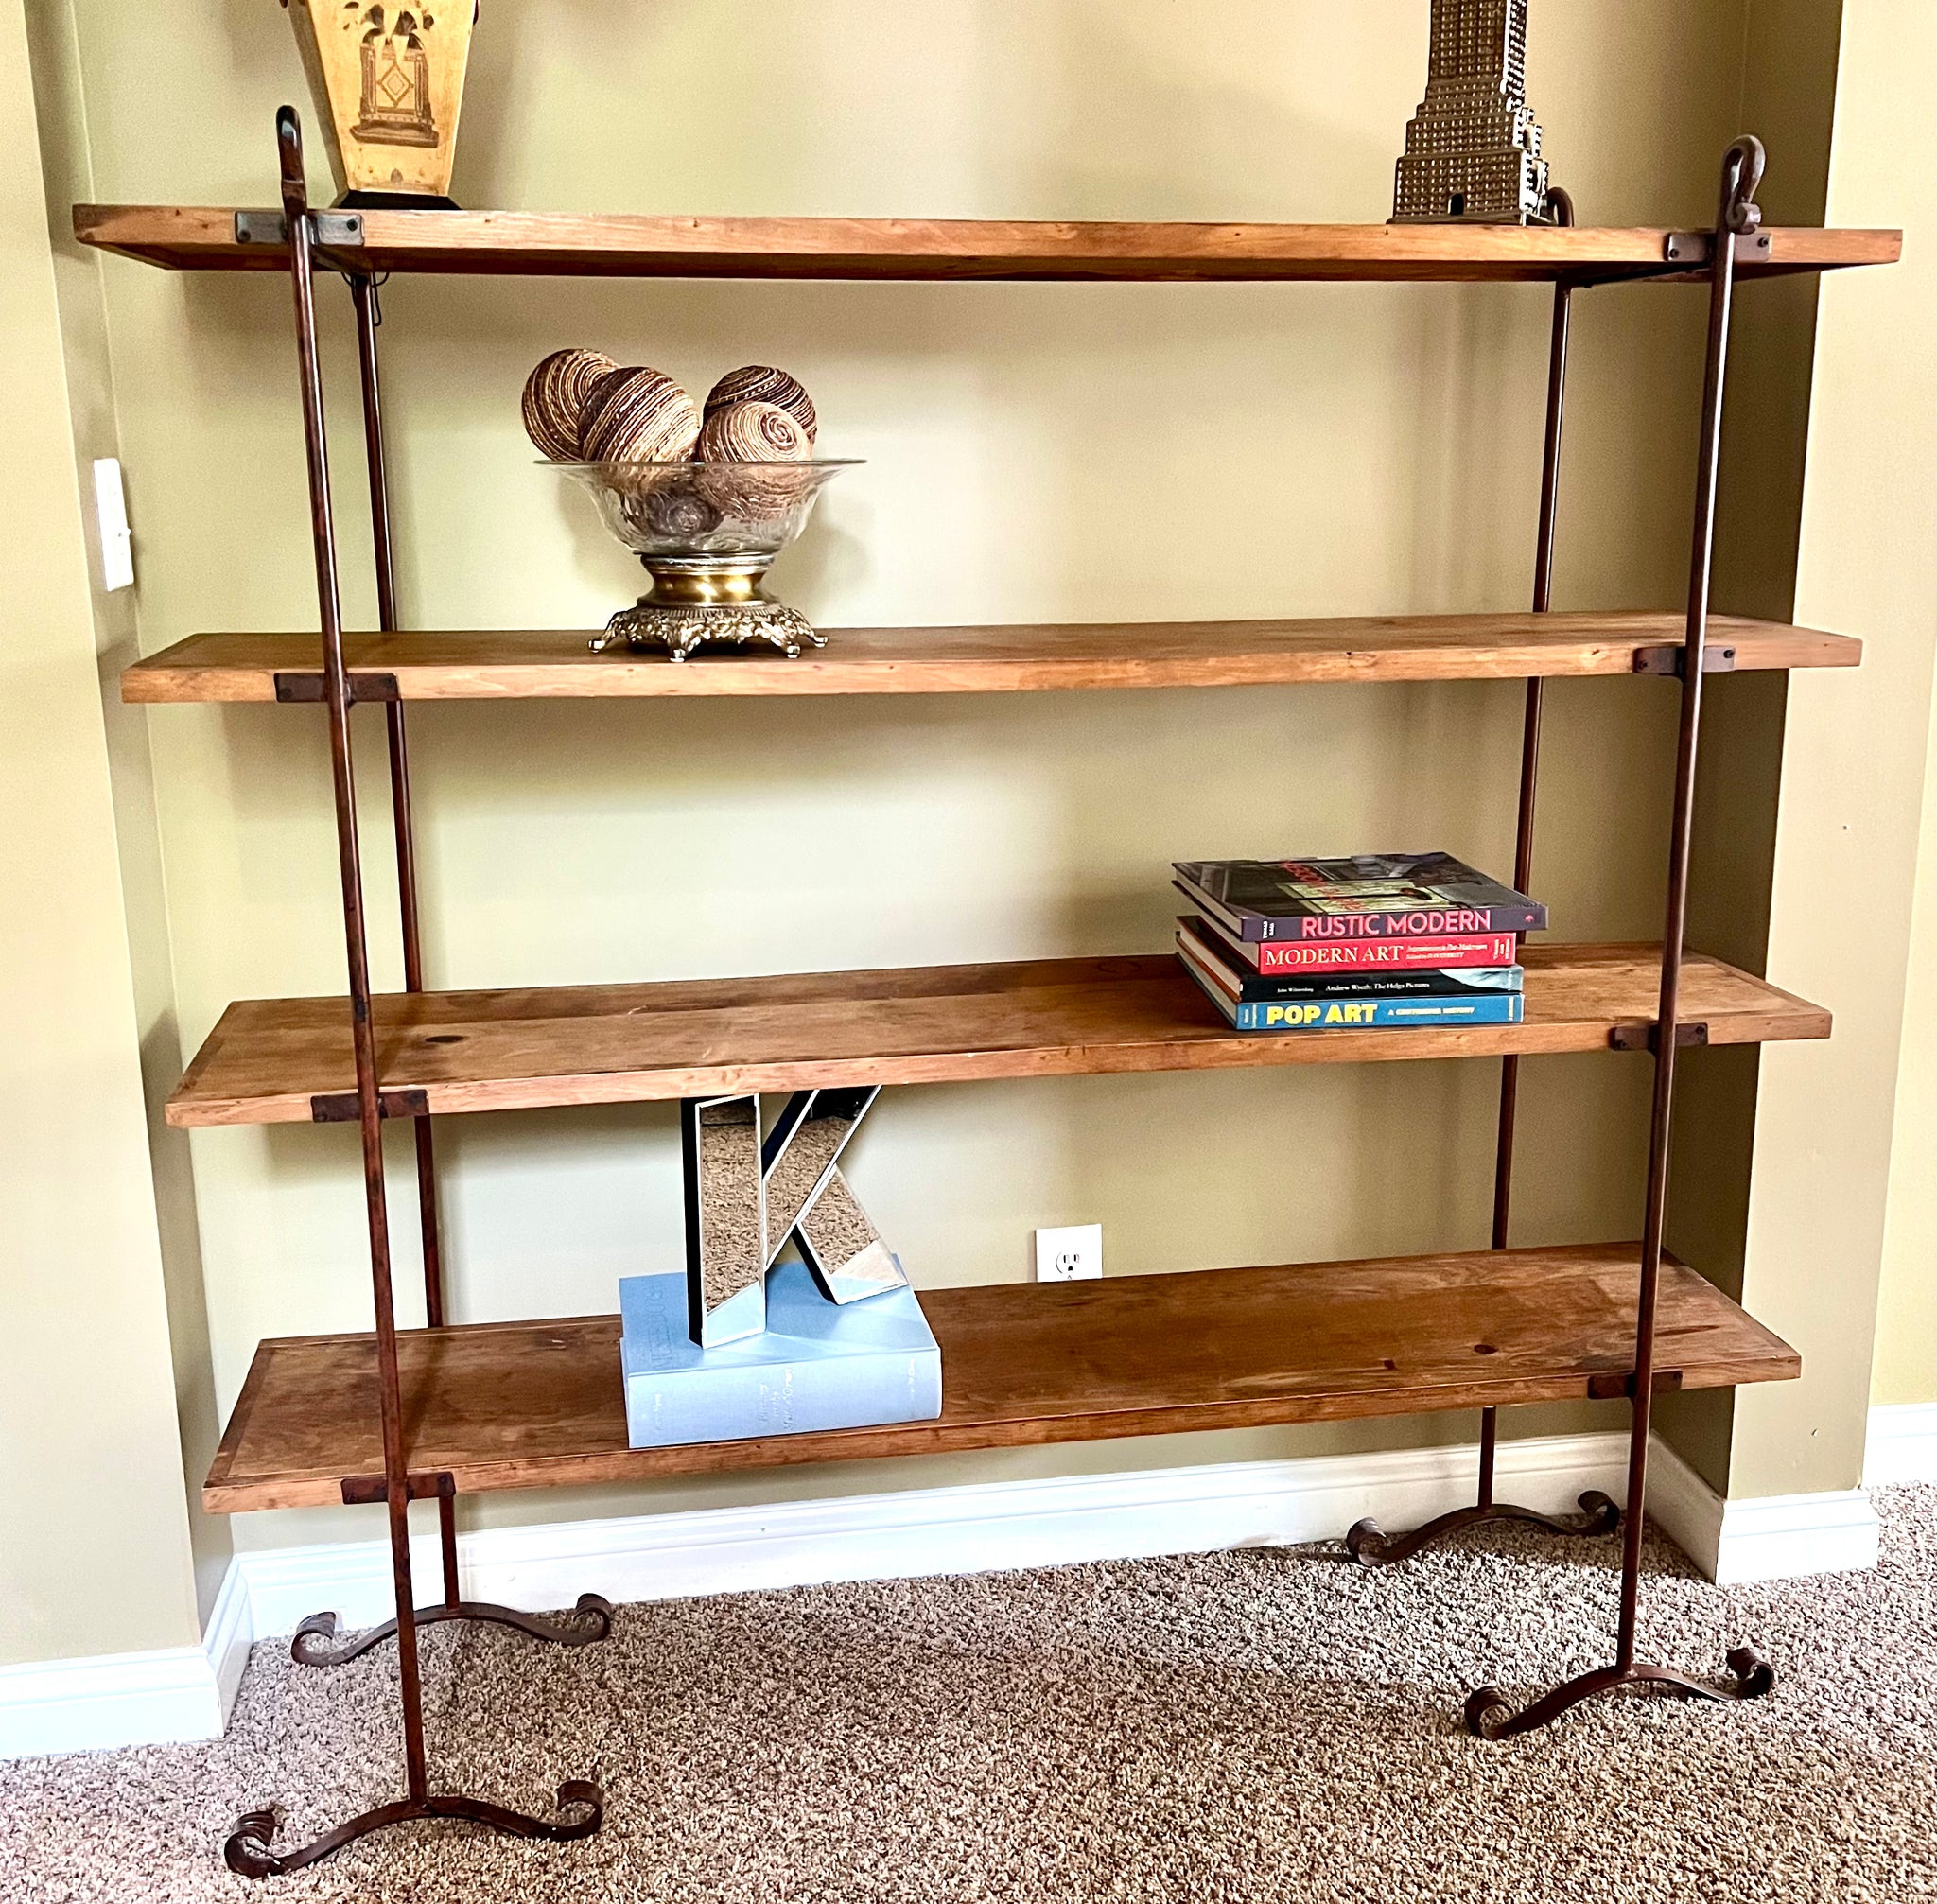 Vintage Iron and Wood Etagere Bakers Rack